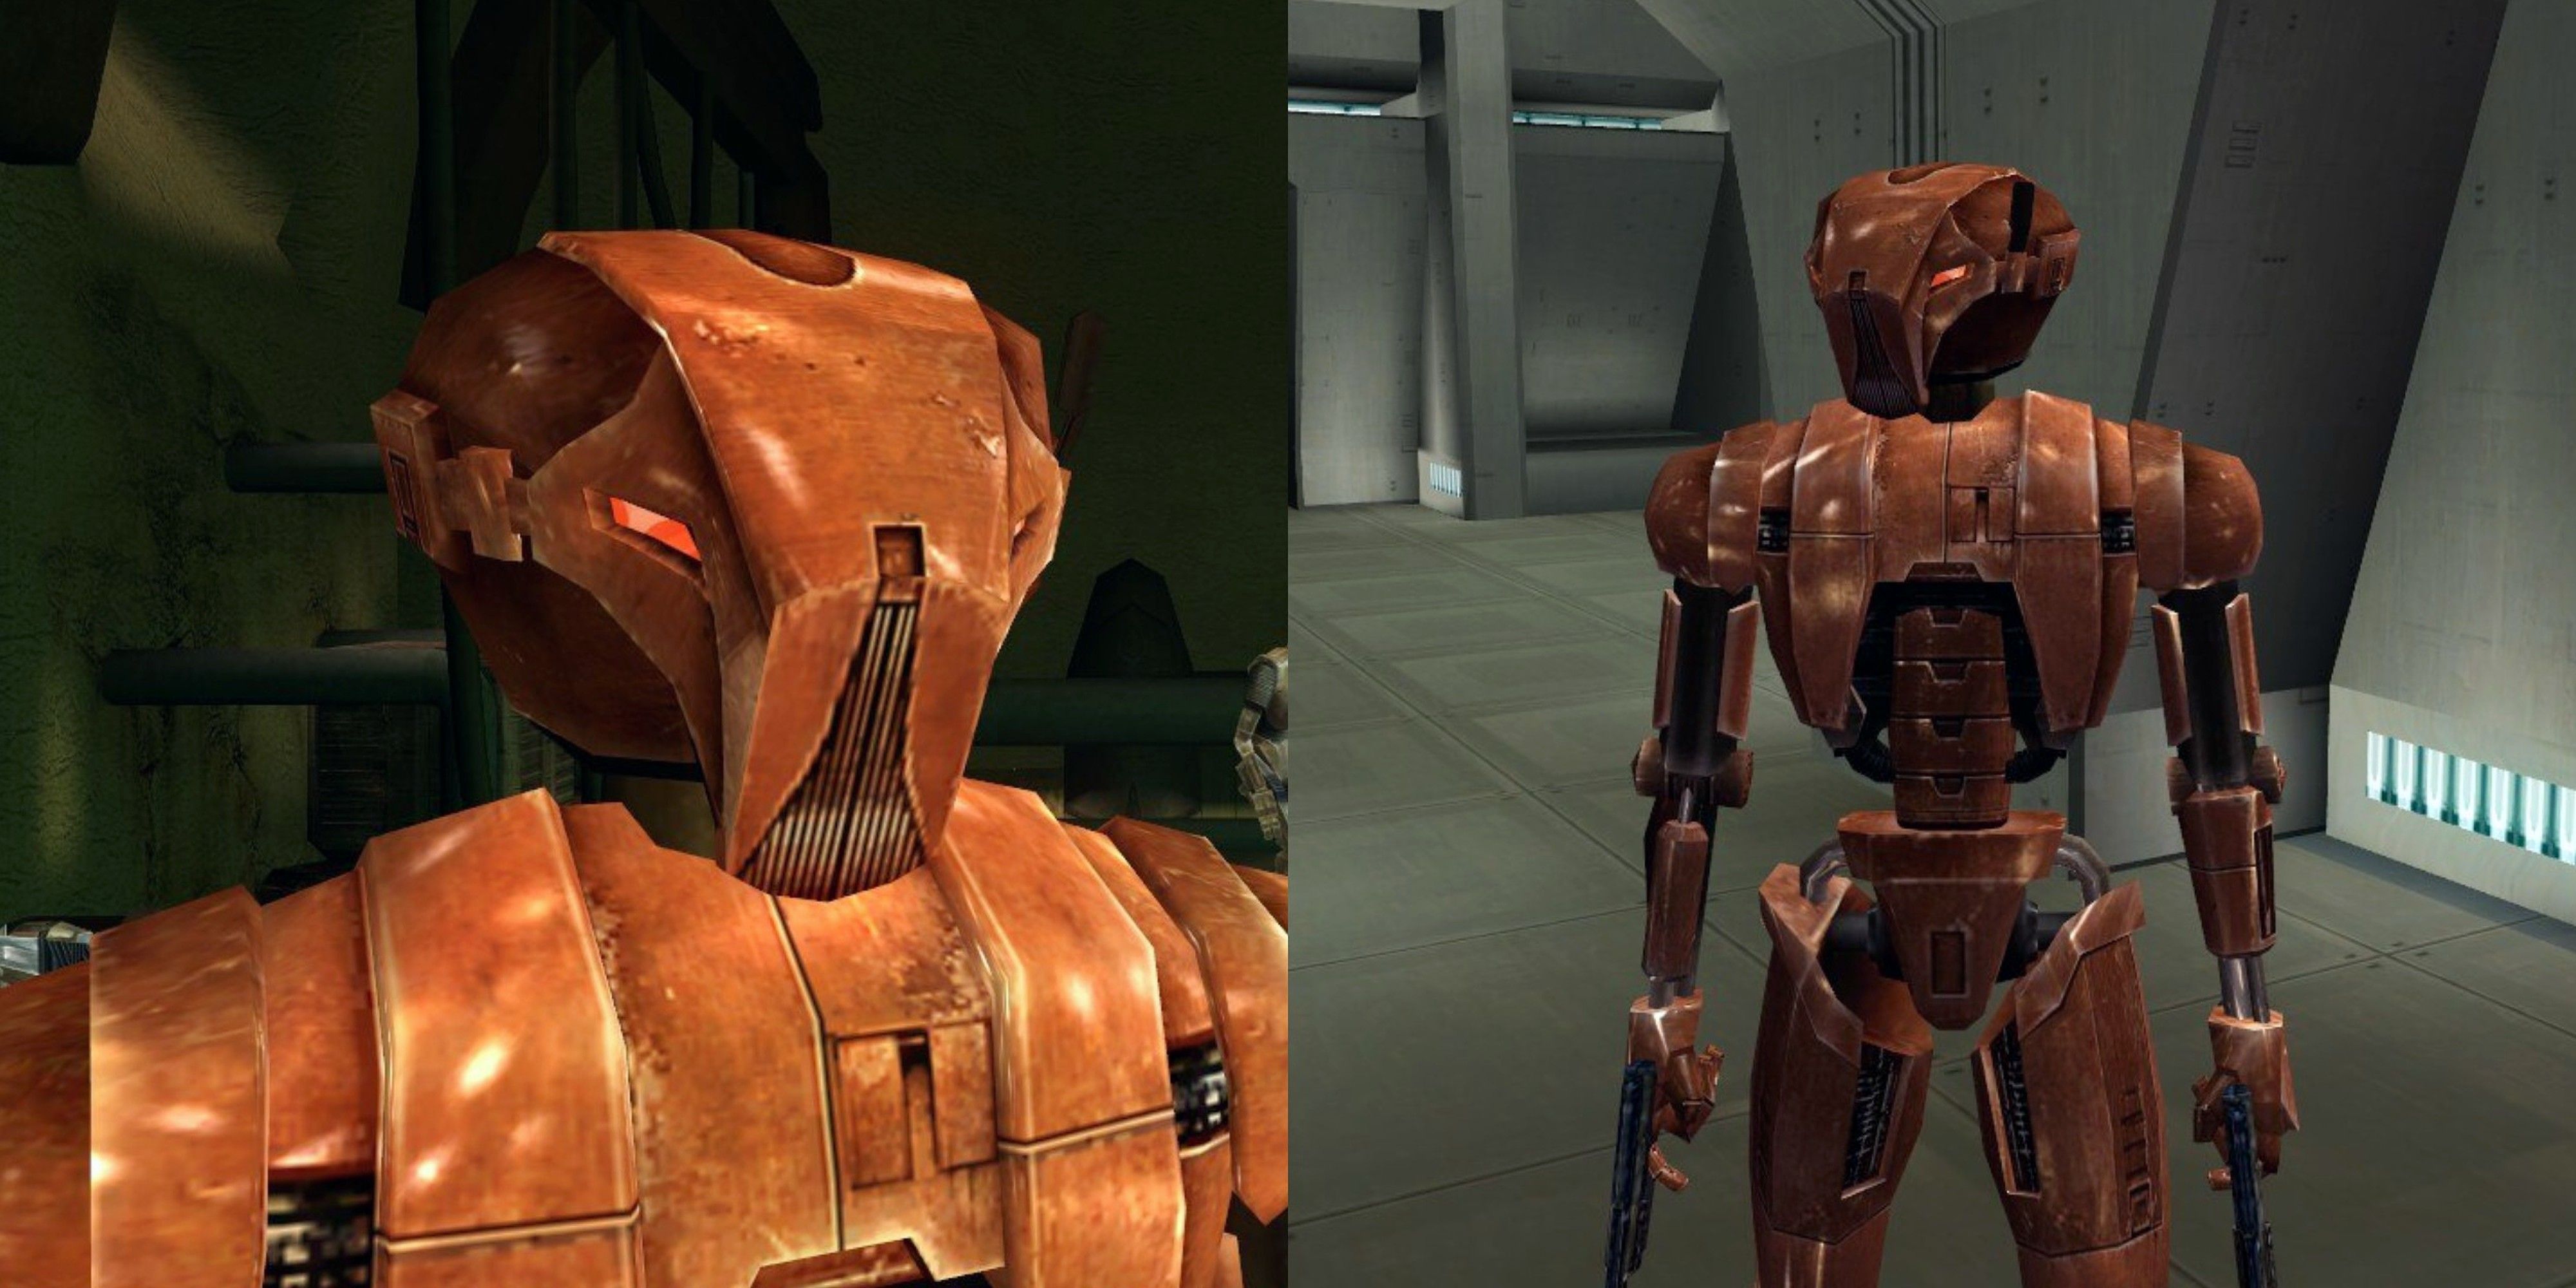 HK-47 in Star Wars: Knights of the Old Republic